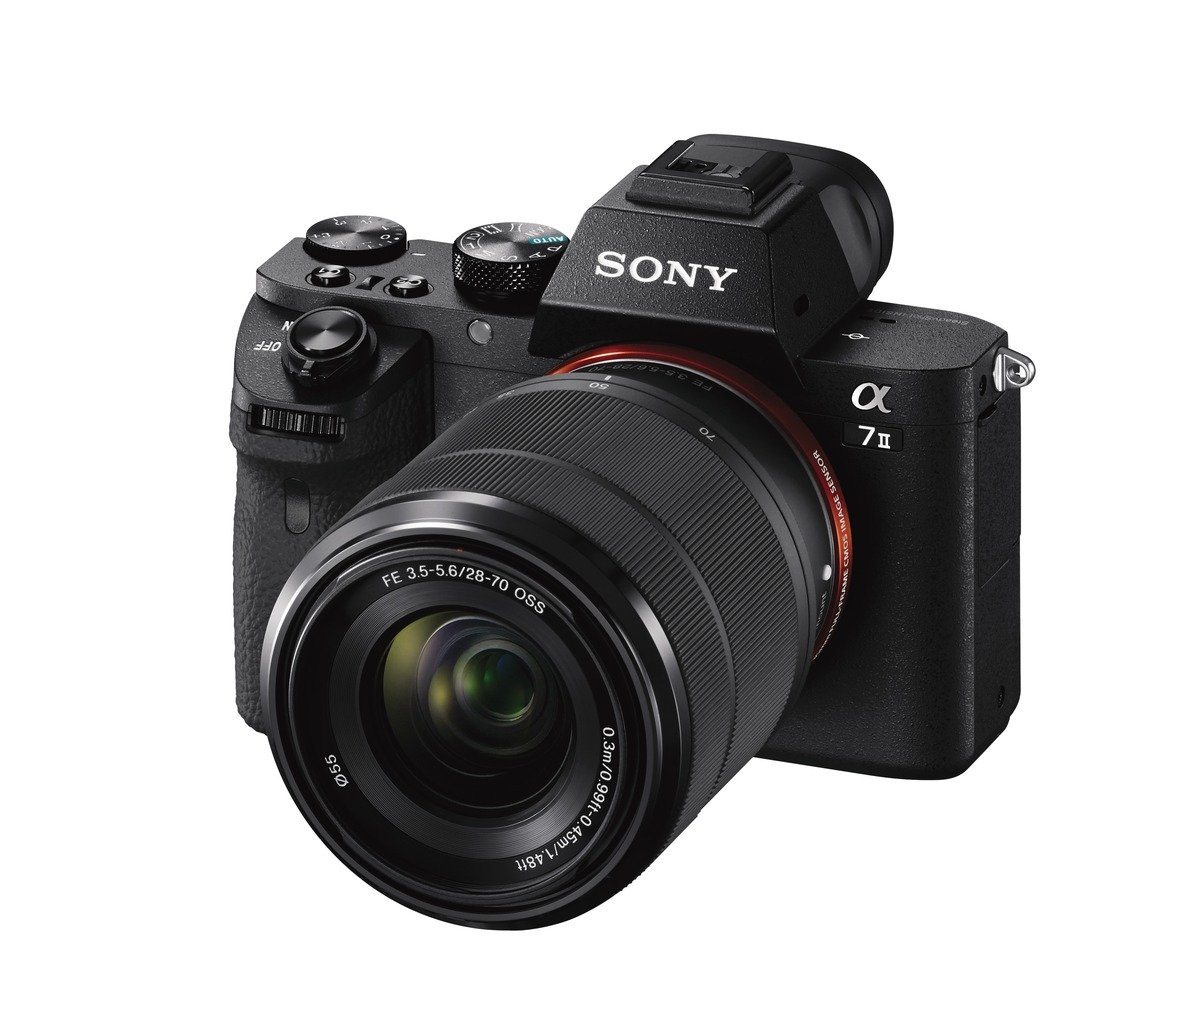 Sony Alpha a7 IIK E-mount interchangeable lens mirrorless camera with full frame sensor with 28-70mm Lens